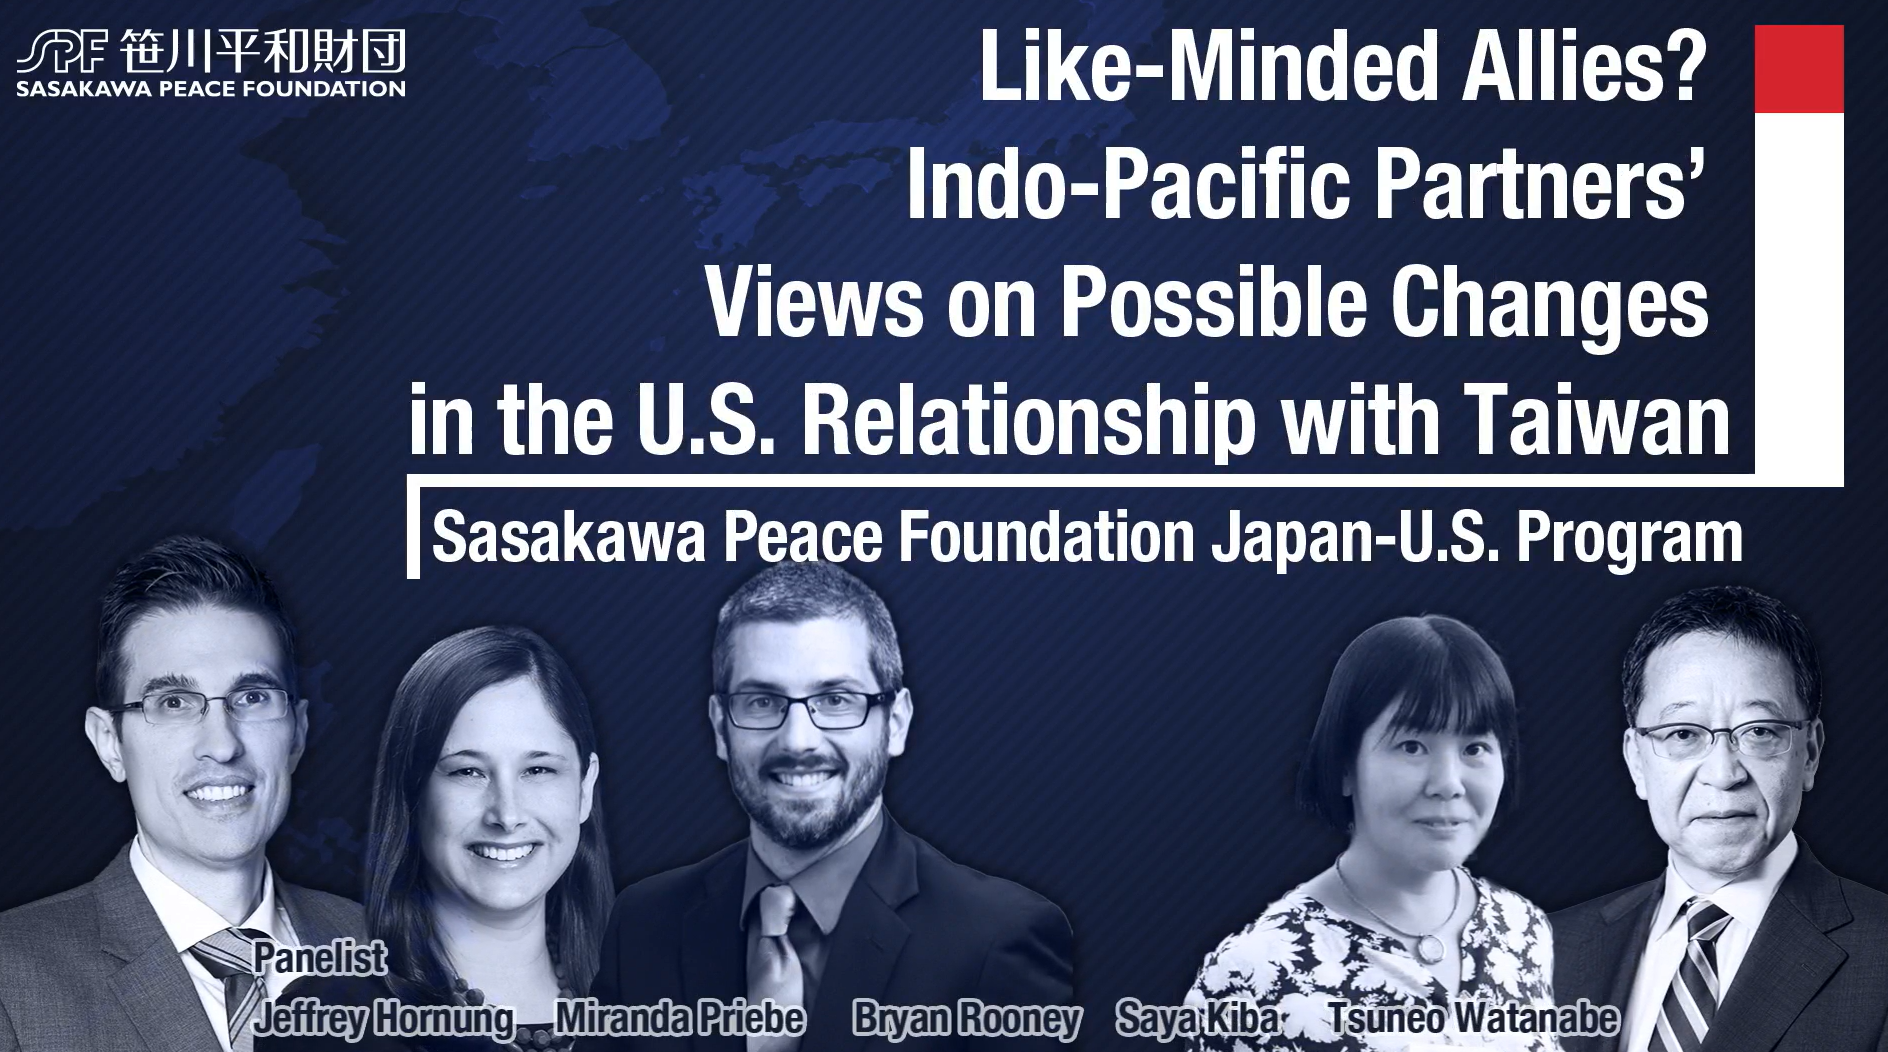 【Webinar video available】Like-Minded Allies? Indo-Pacific Partners’ Views on Possible Changes in the U.S. Relationship with Taiwan